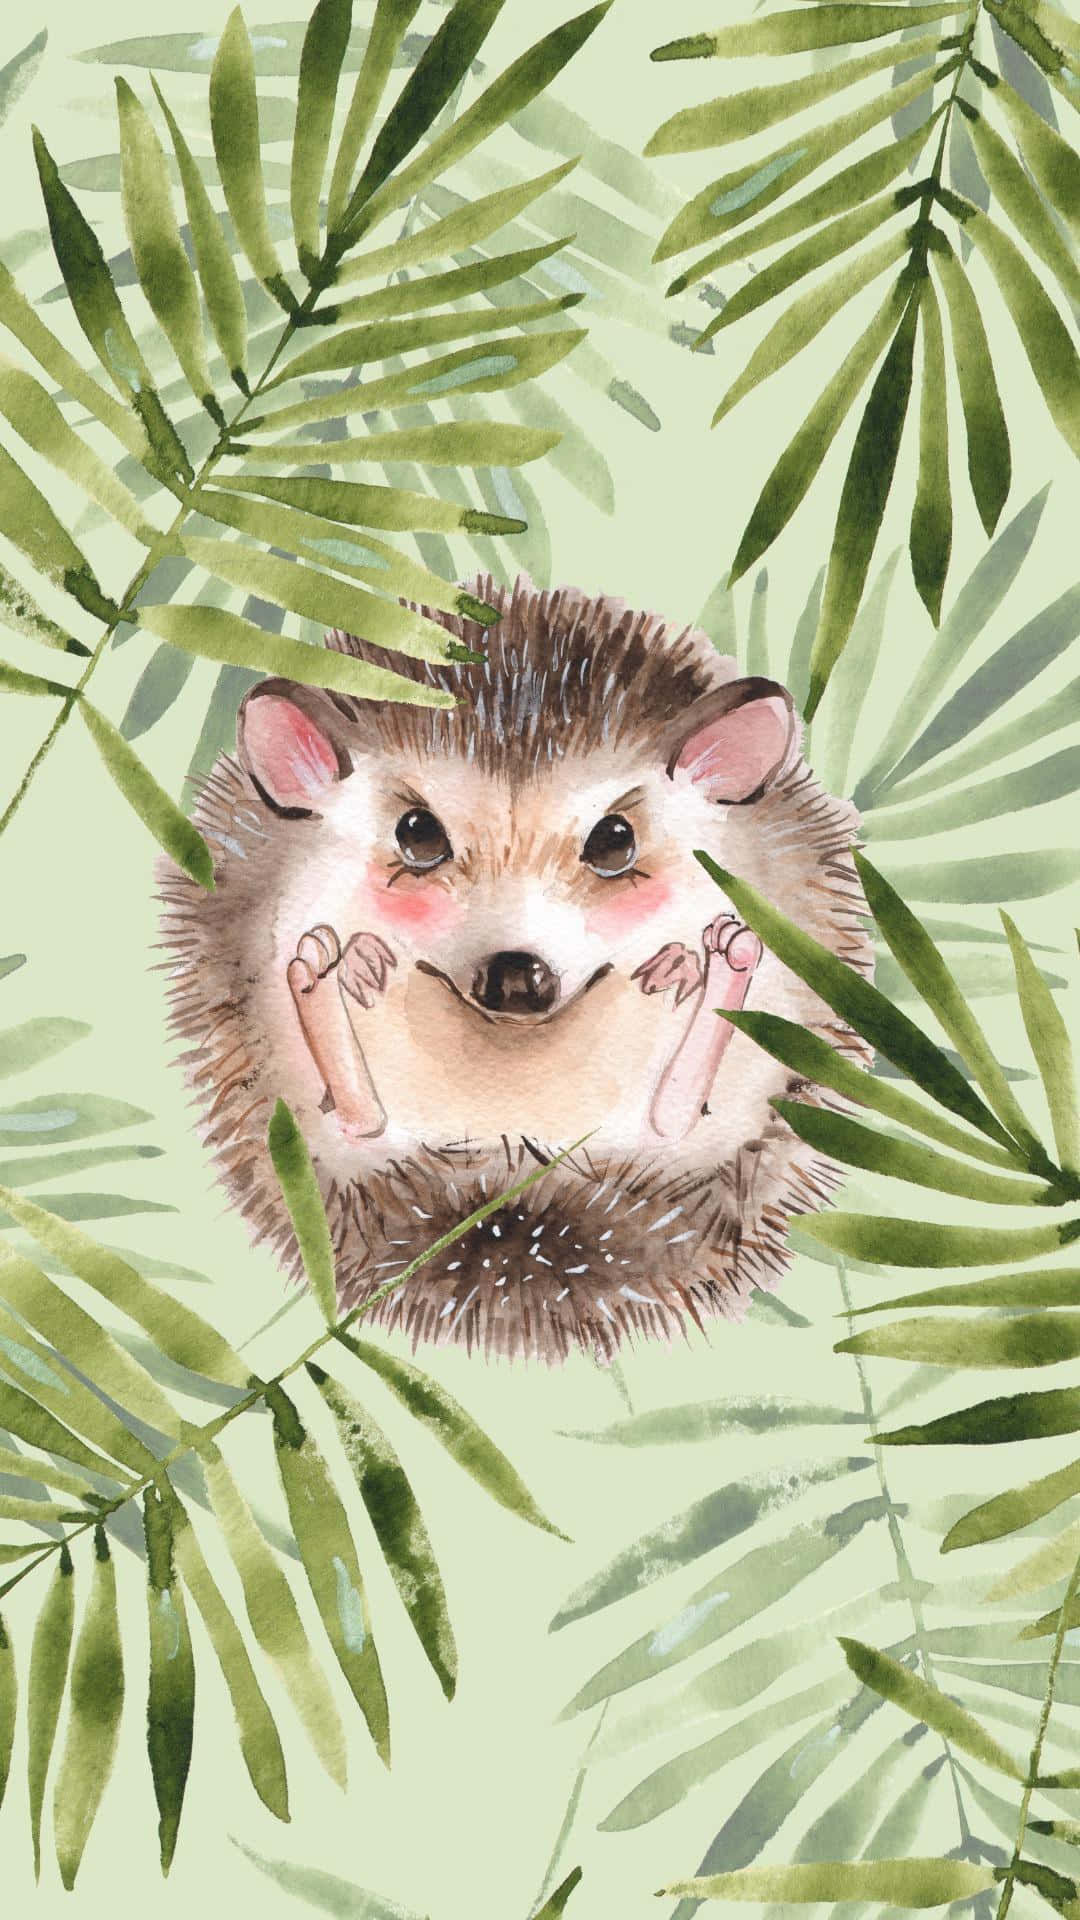 Cute Hedgehog Art With Fern Leaves Picture